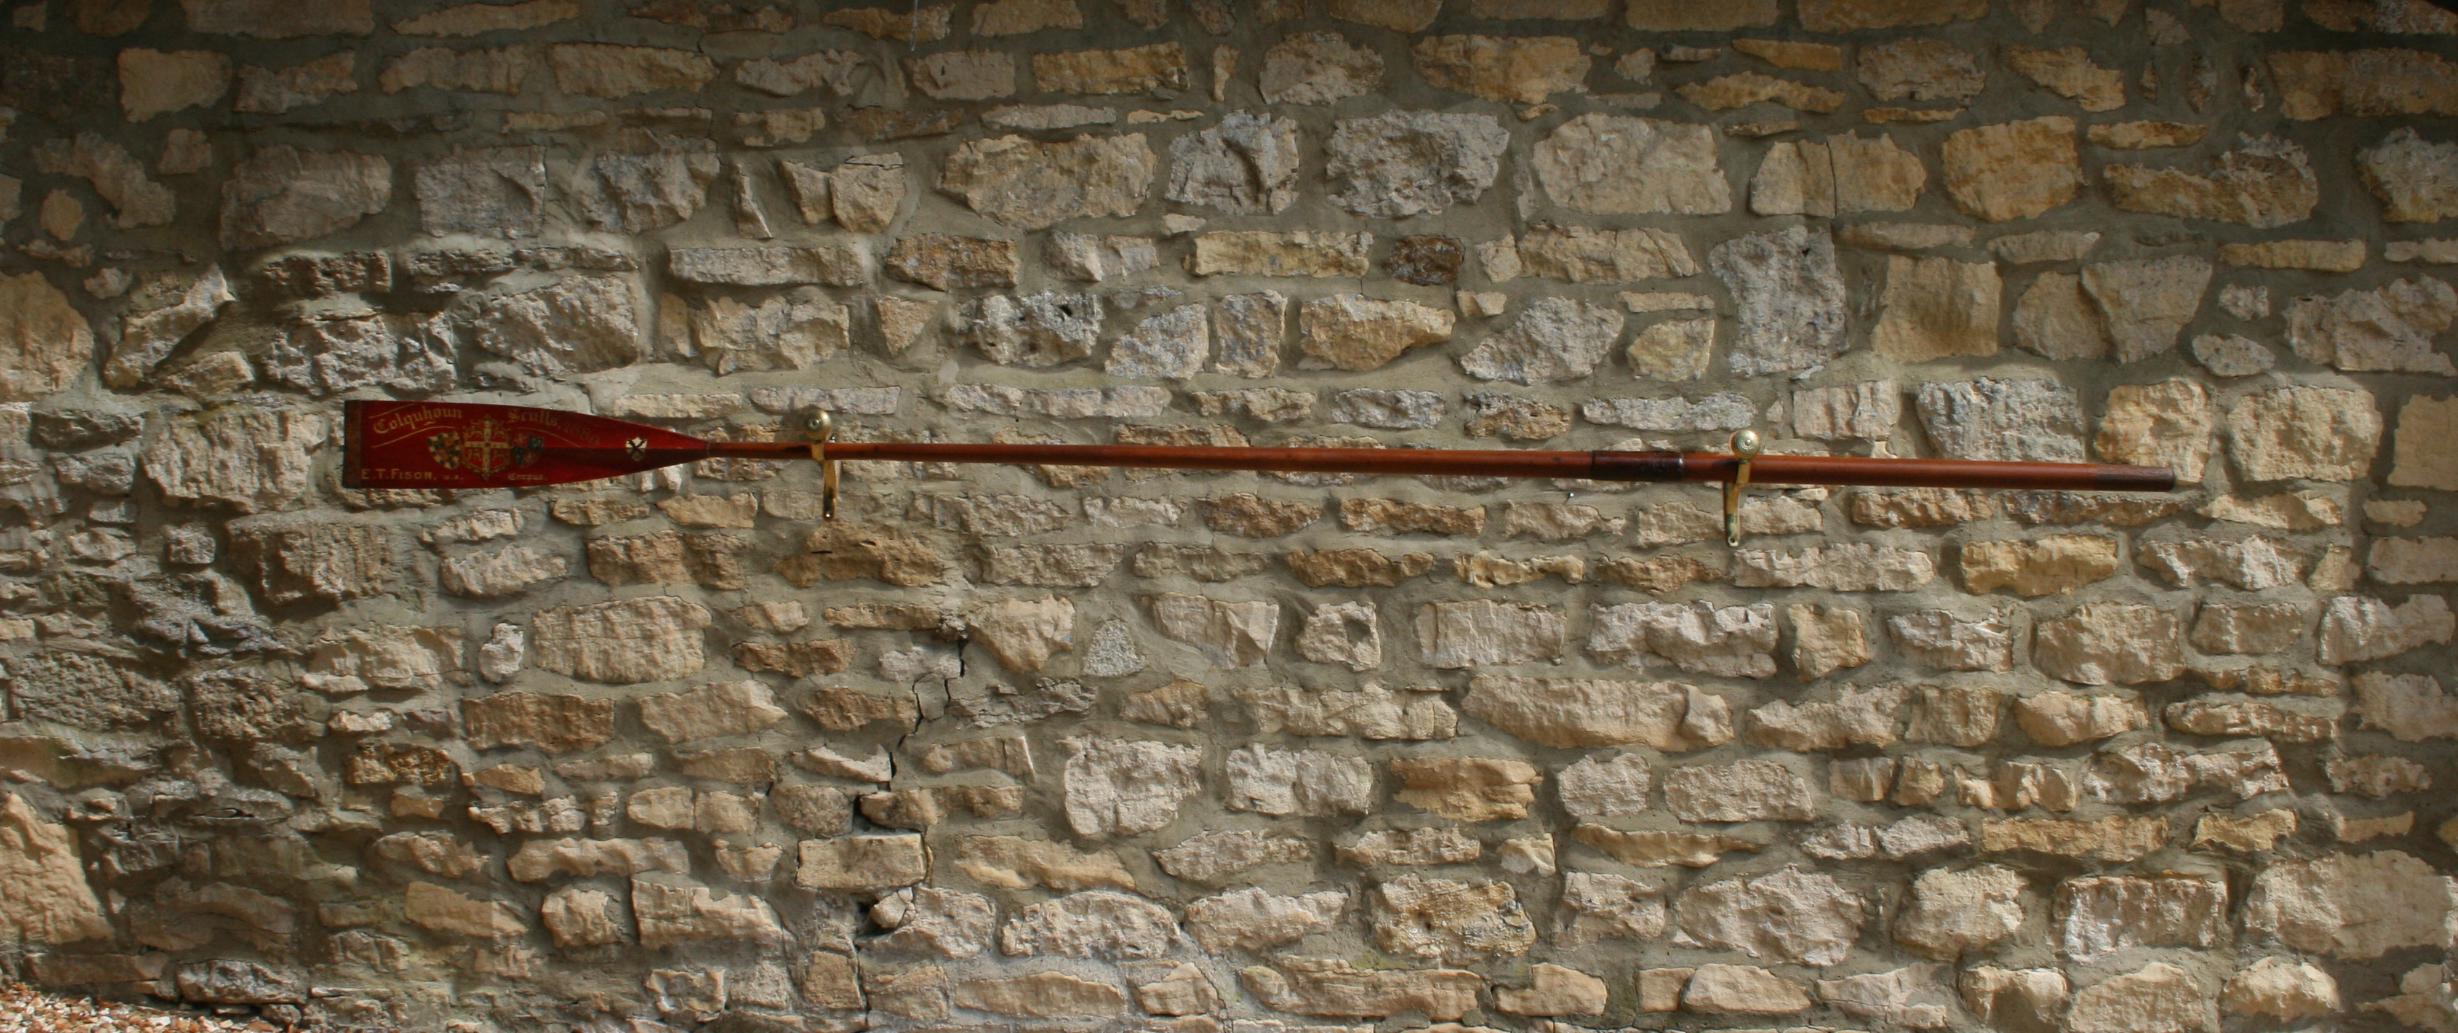 A fine pair of 1889 Colquhoun sculls trophy oars.
The full length Corpus Christi, Cambridge University sculling oar is an original traditional presentation rowing oar with gilt calligraphy and college insignias. The writing on the trophy blade is in